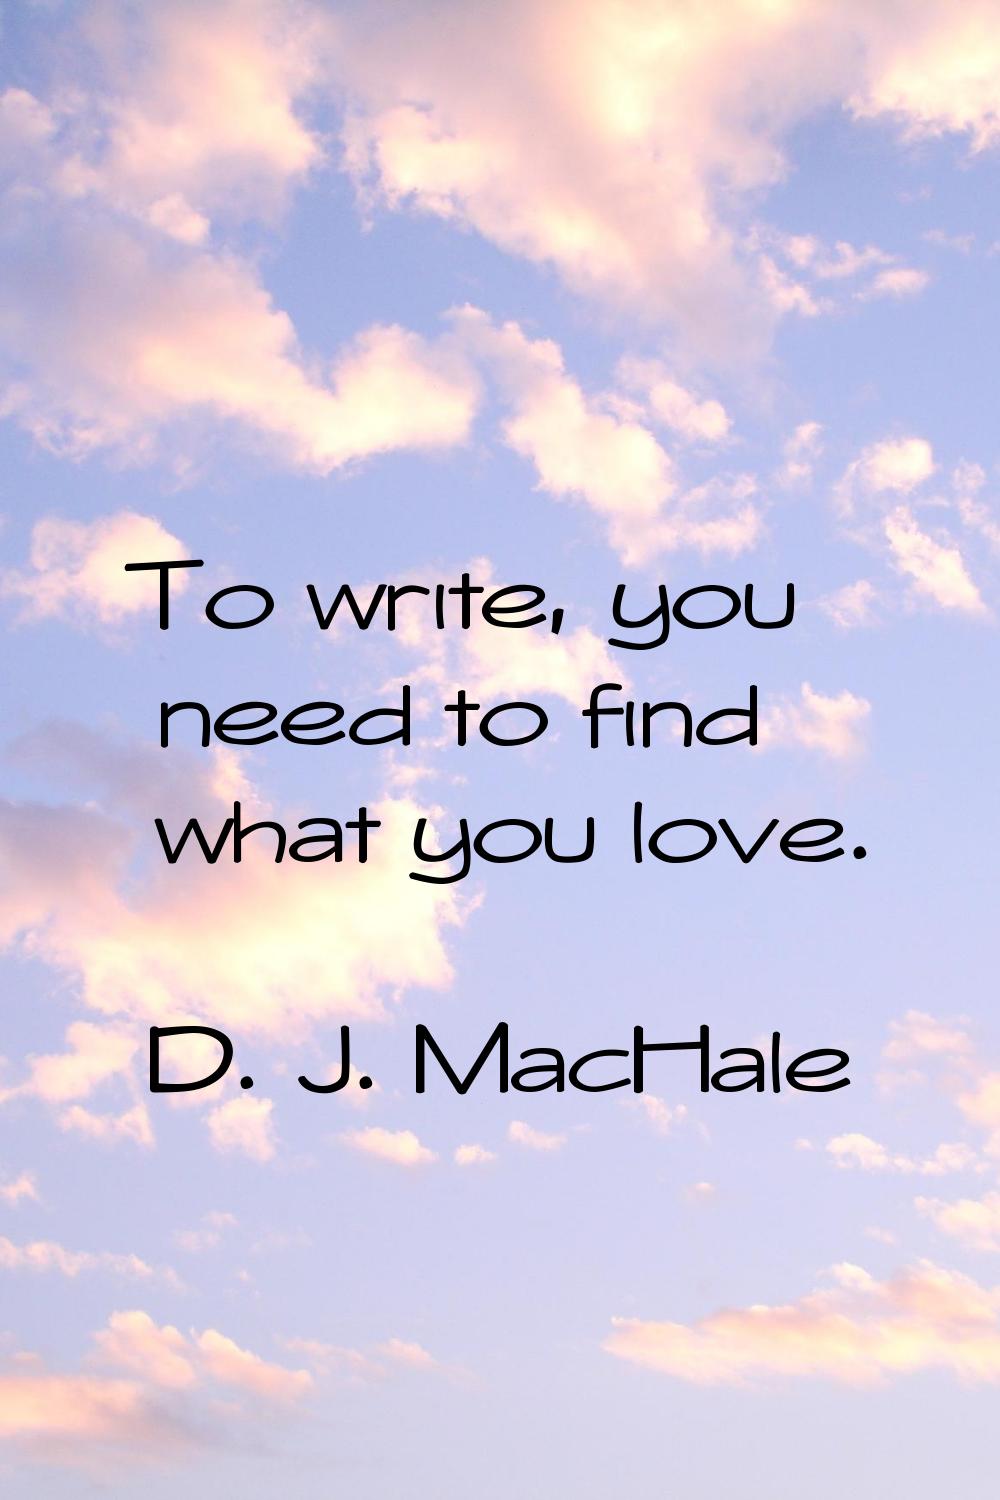 To write, you need to find what you love.